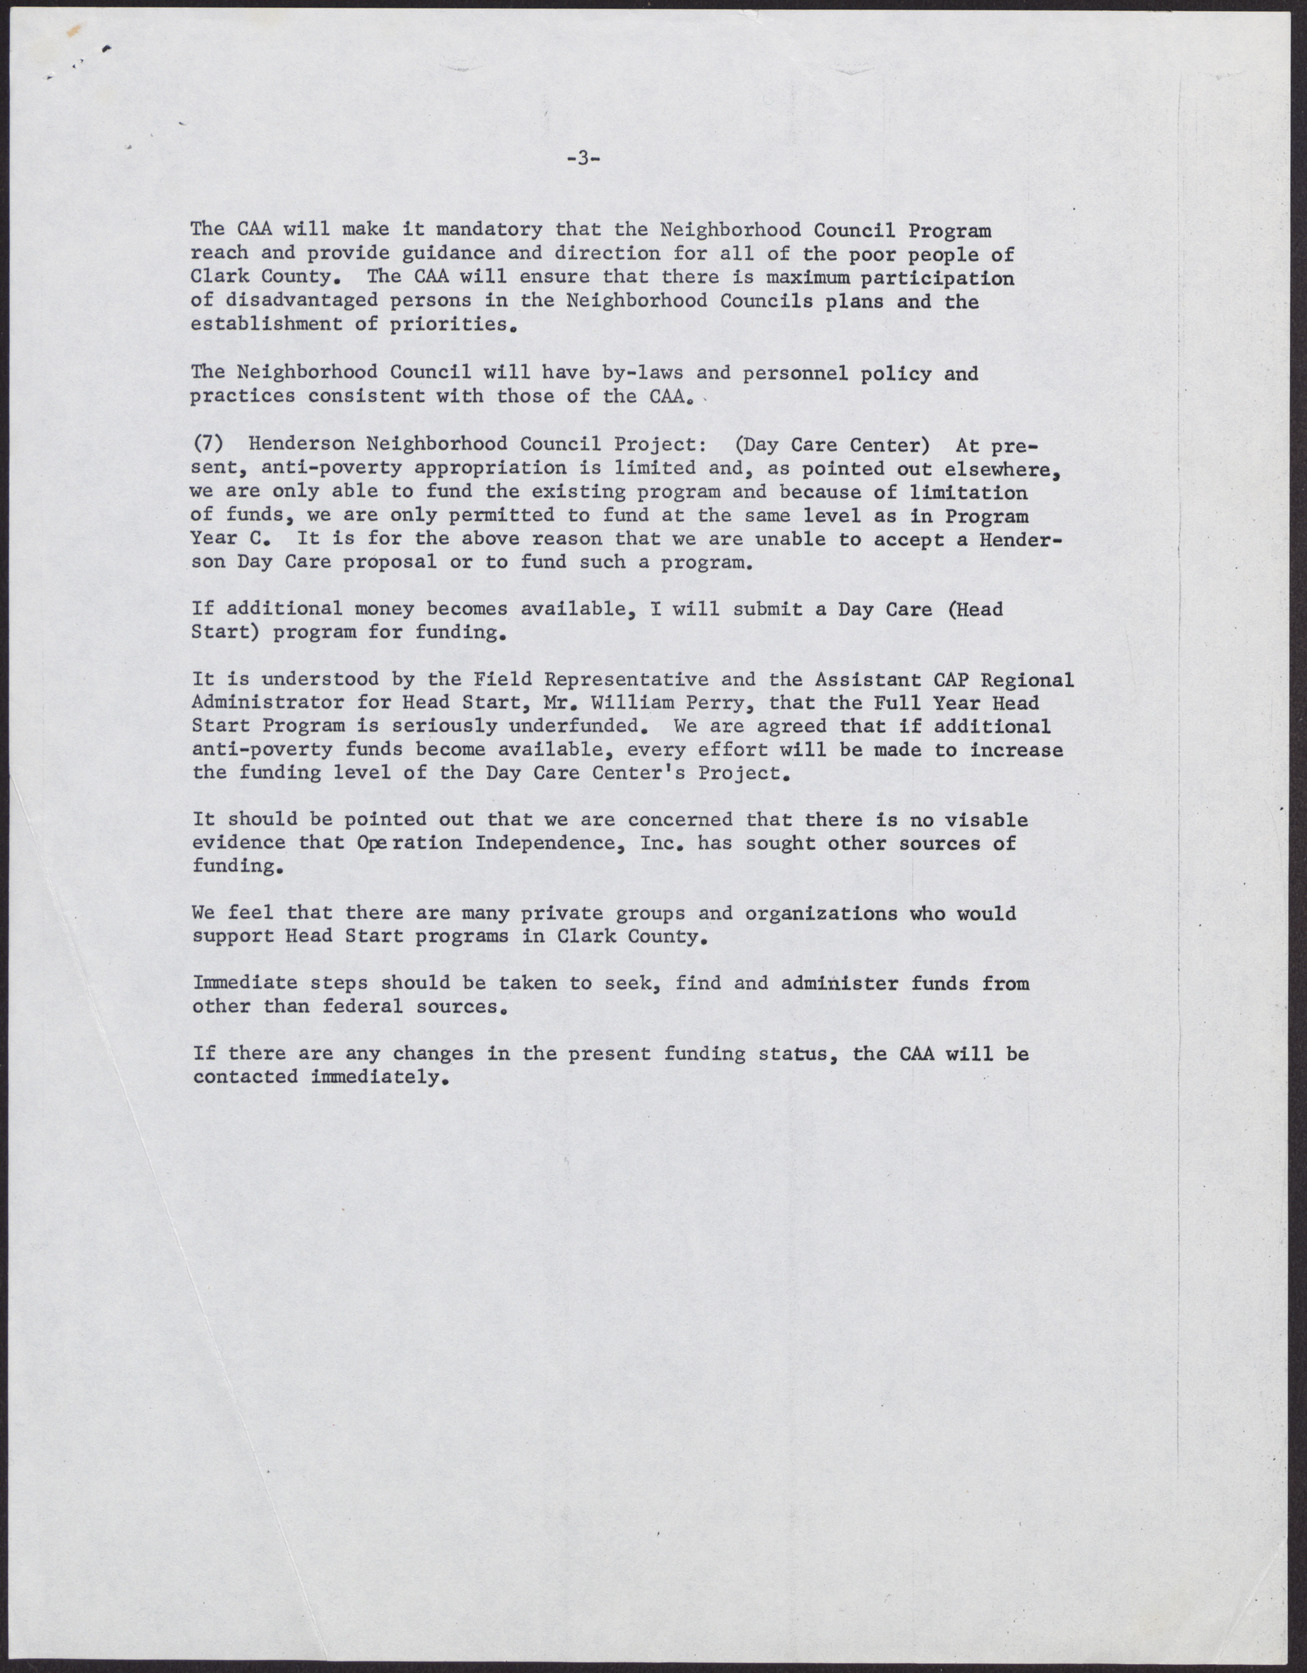 Letter to Economic Opportunity Board from Carlton Dias (3 pages), December 9, 1968, page 3